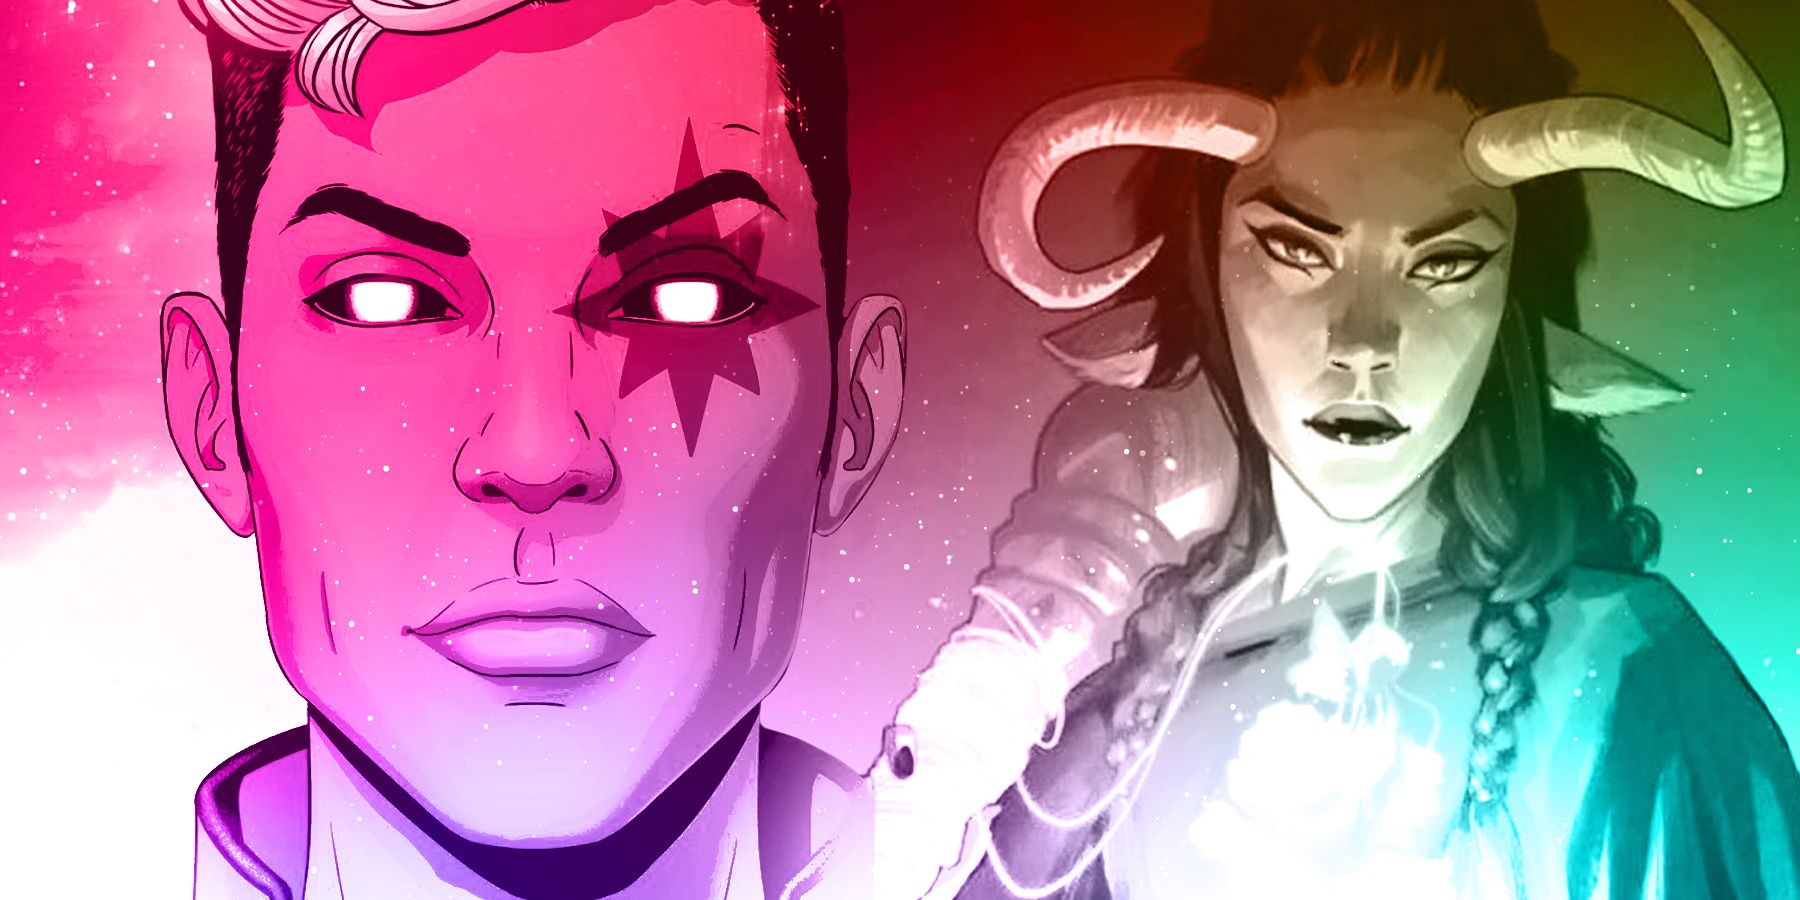 10 Comics To Read For LGBTQA+ Representation (& Why)